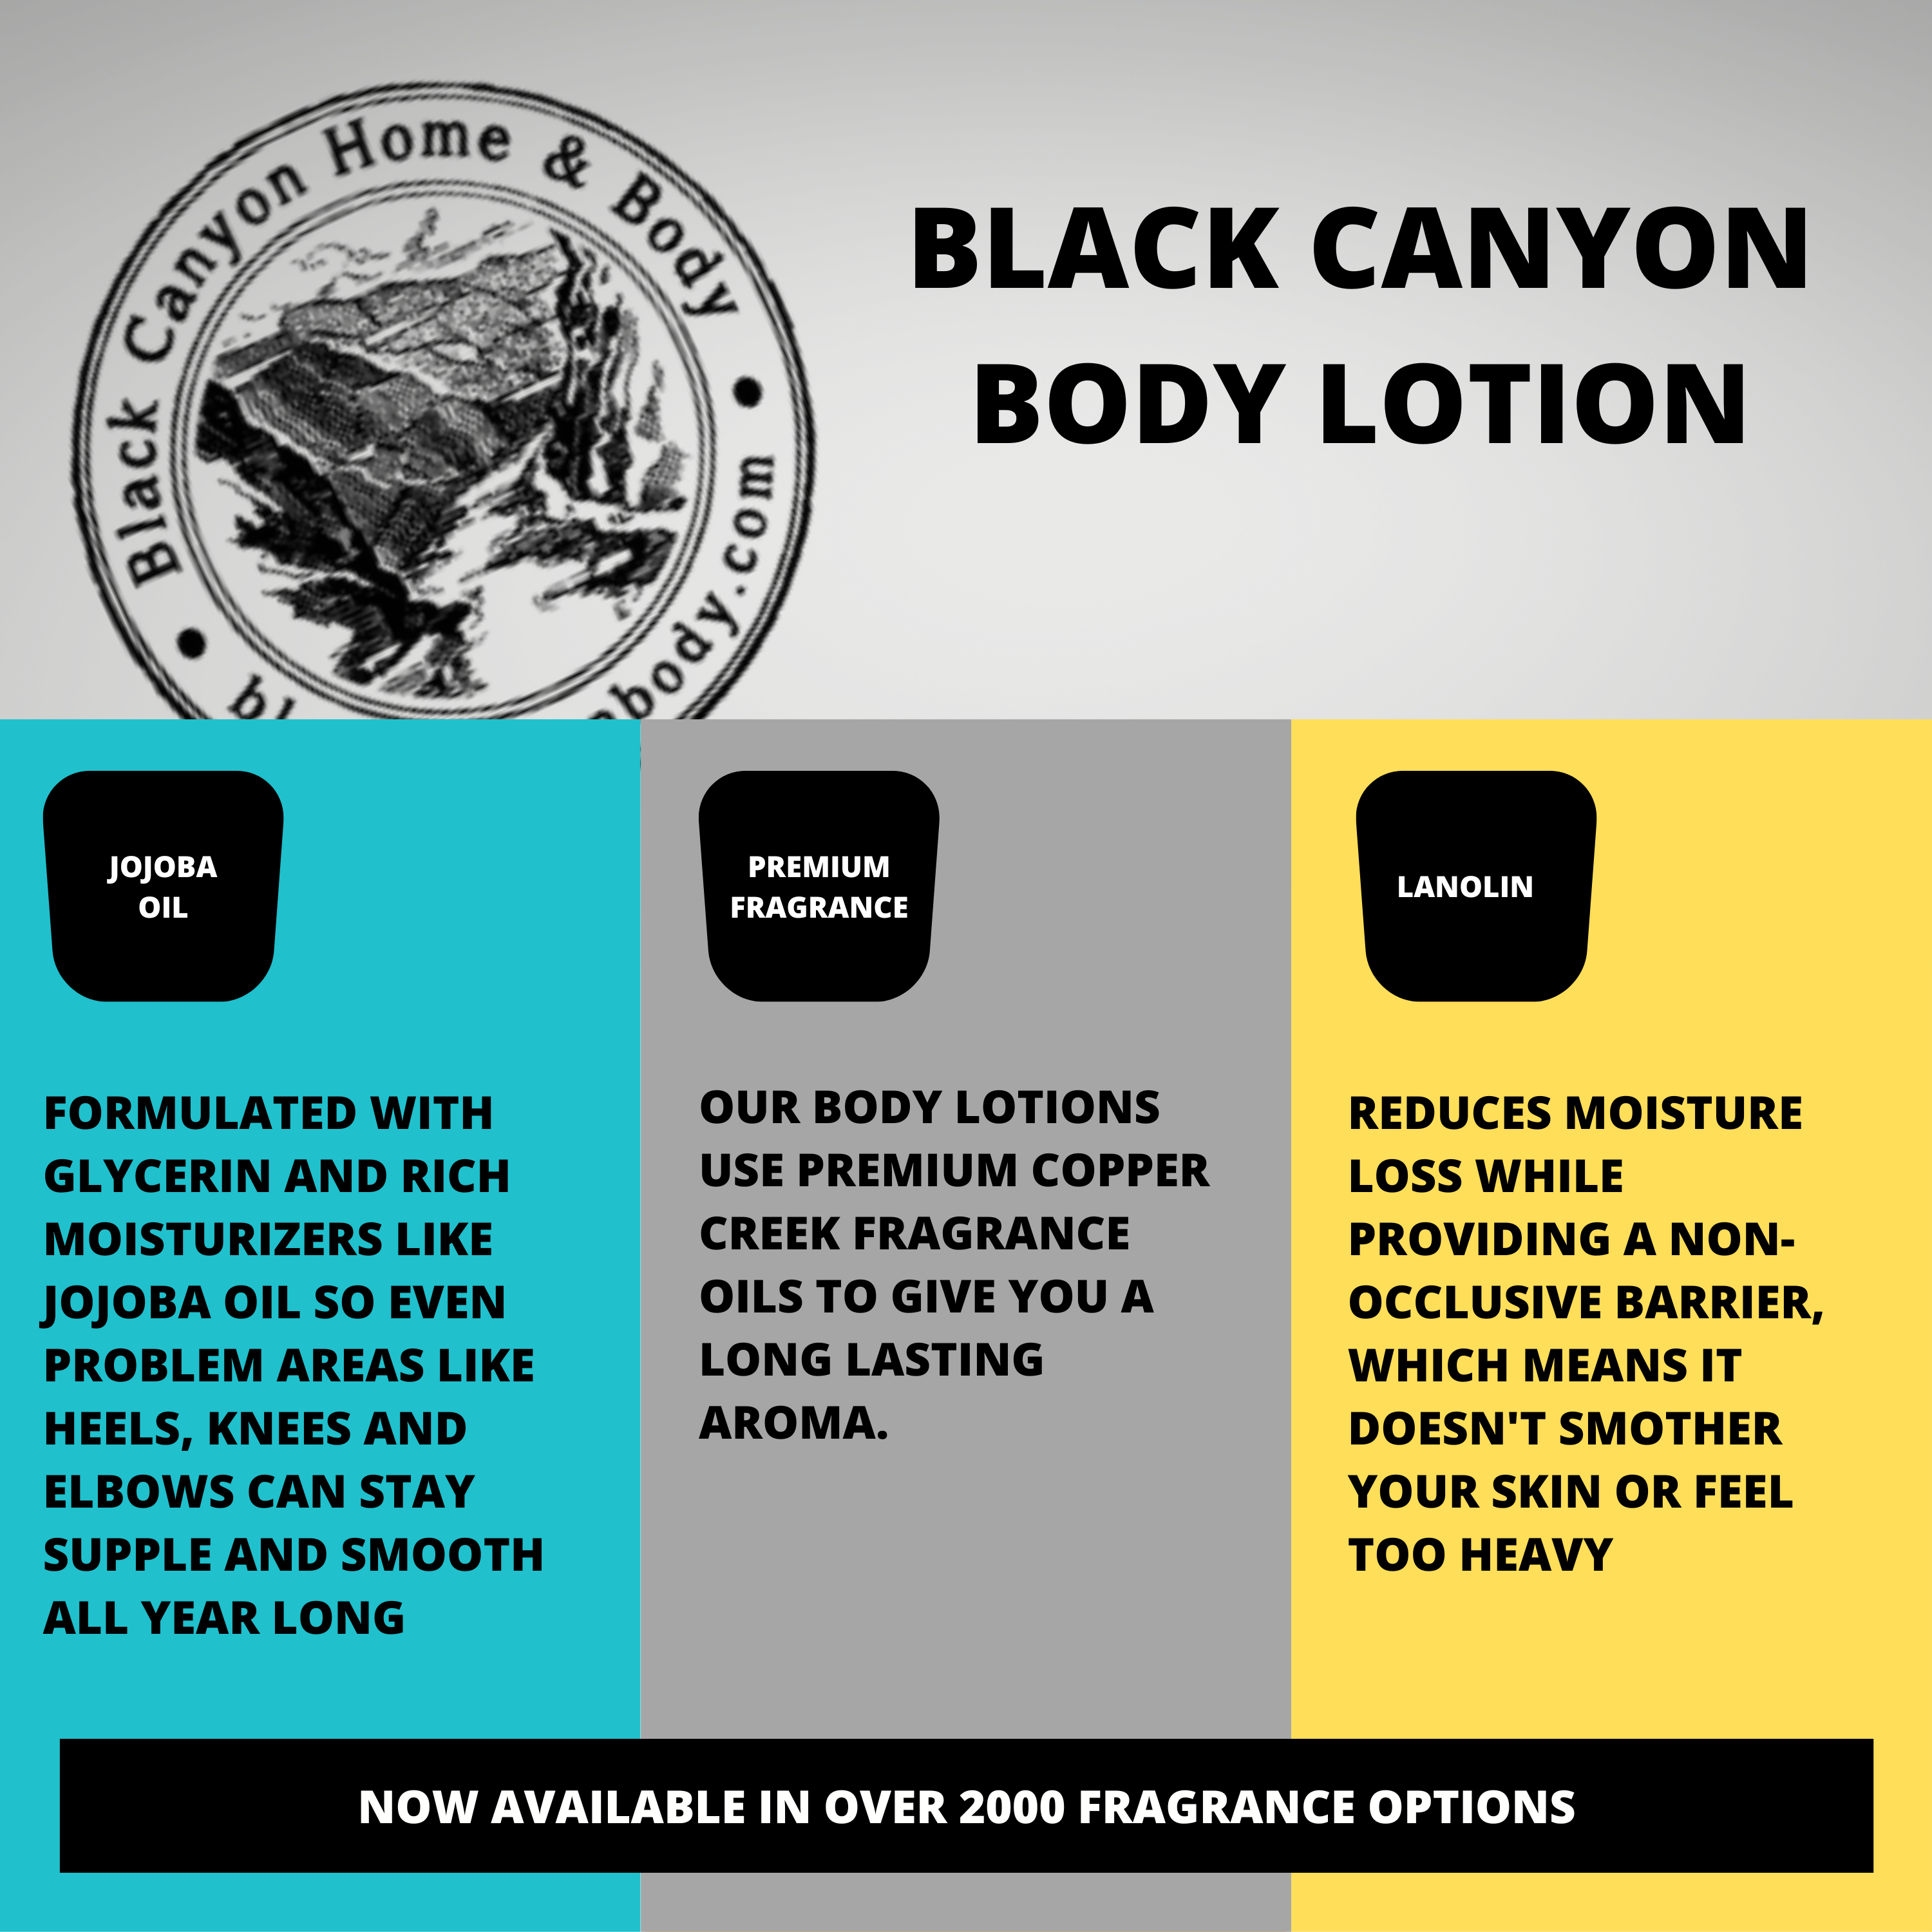 Black Canyon Grapefruit Delight Scented Luxury Body Lotion with Lanolin and Jojoba Oil